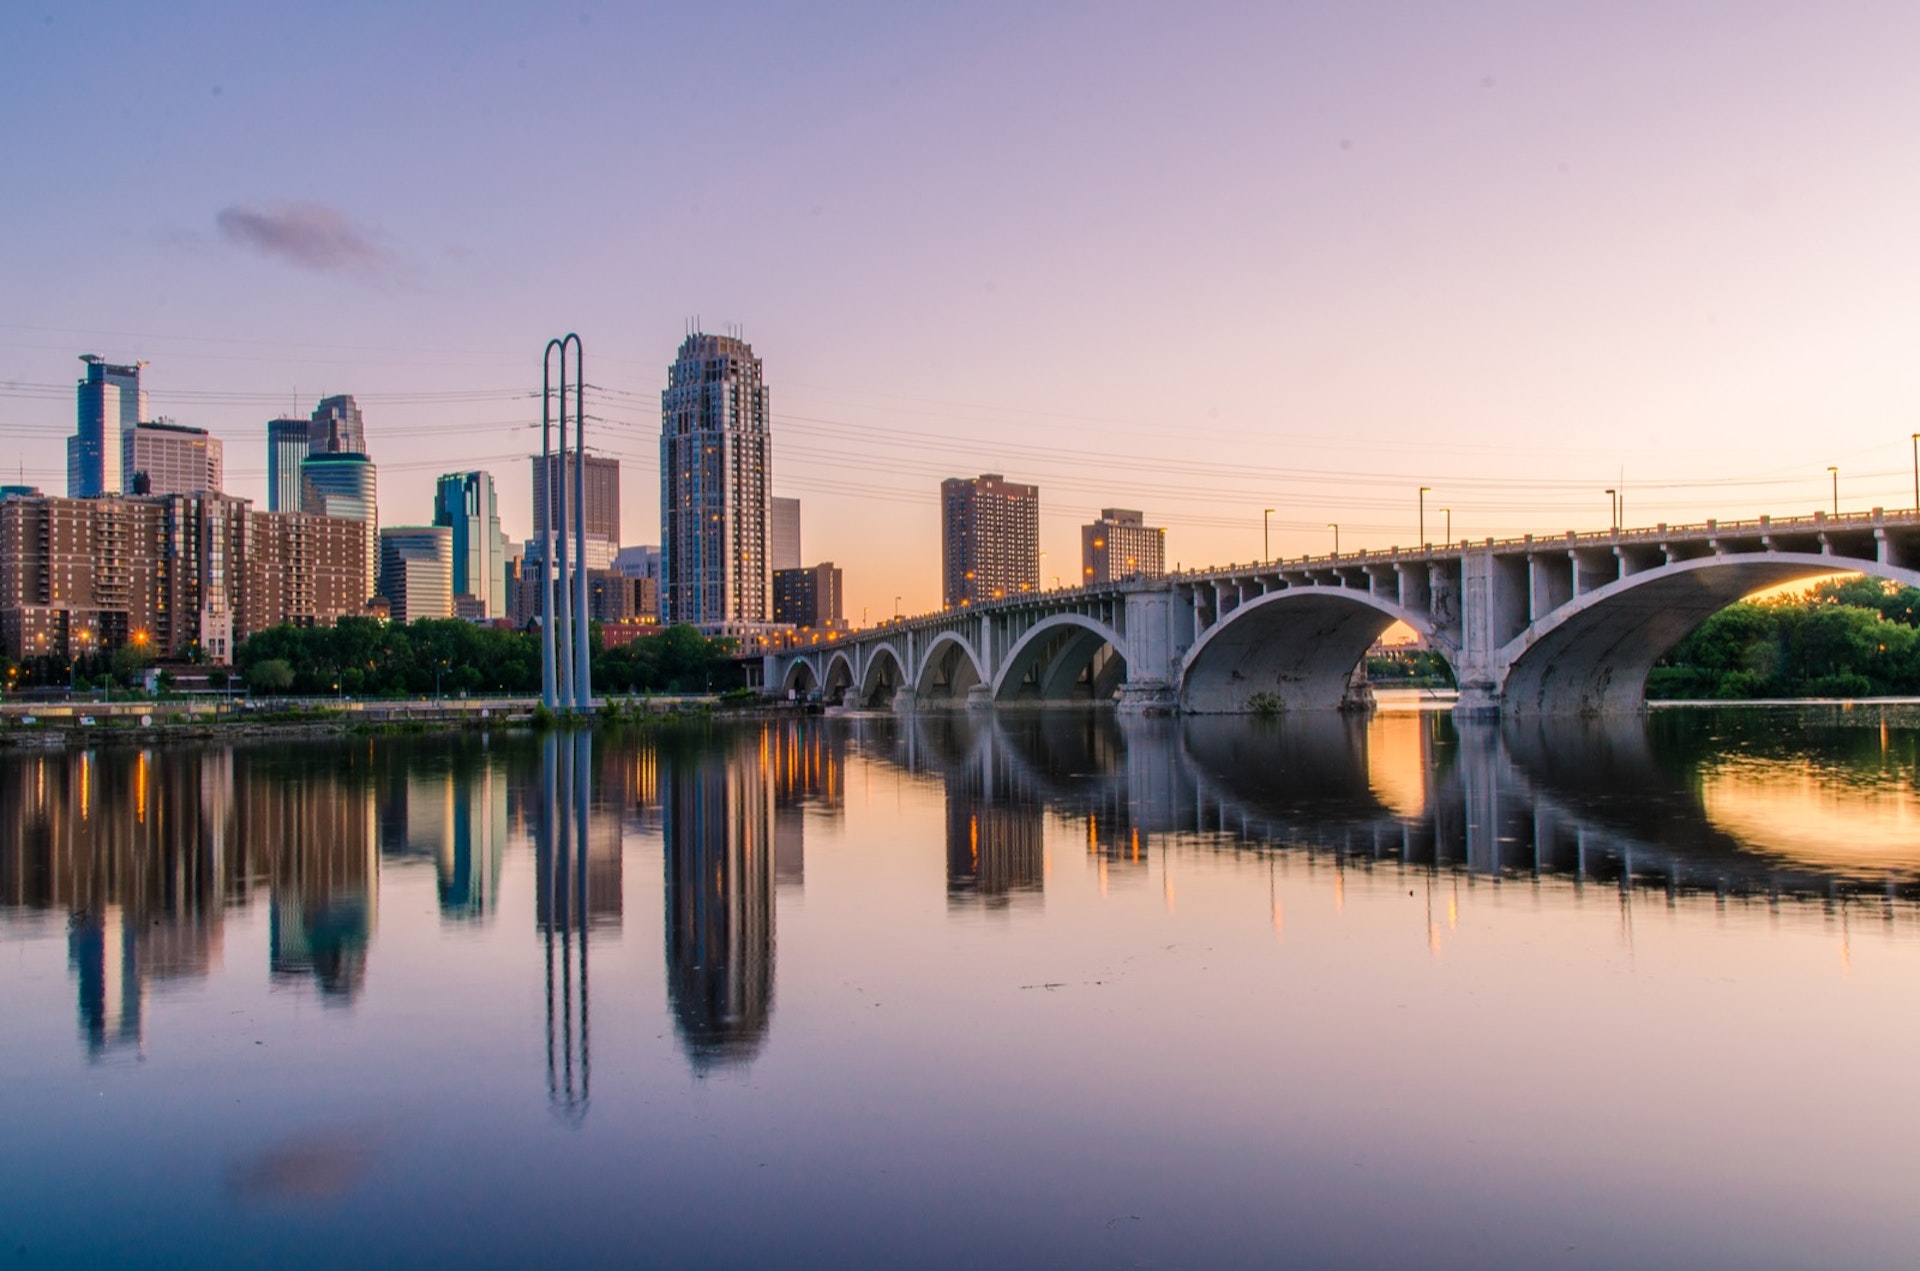 An arched bridge leading toward a city skyline, with water reflecting a lilac sky above; labor day weekend 